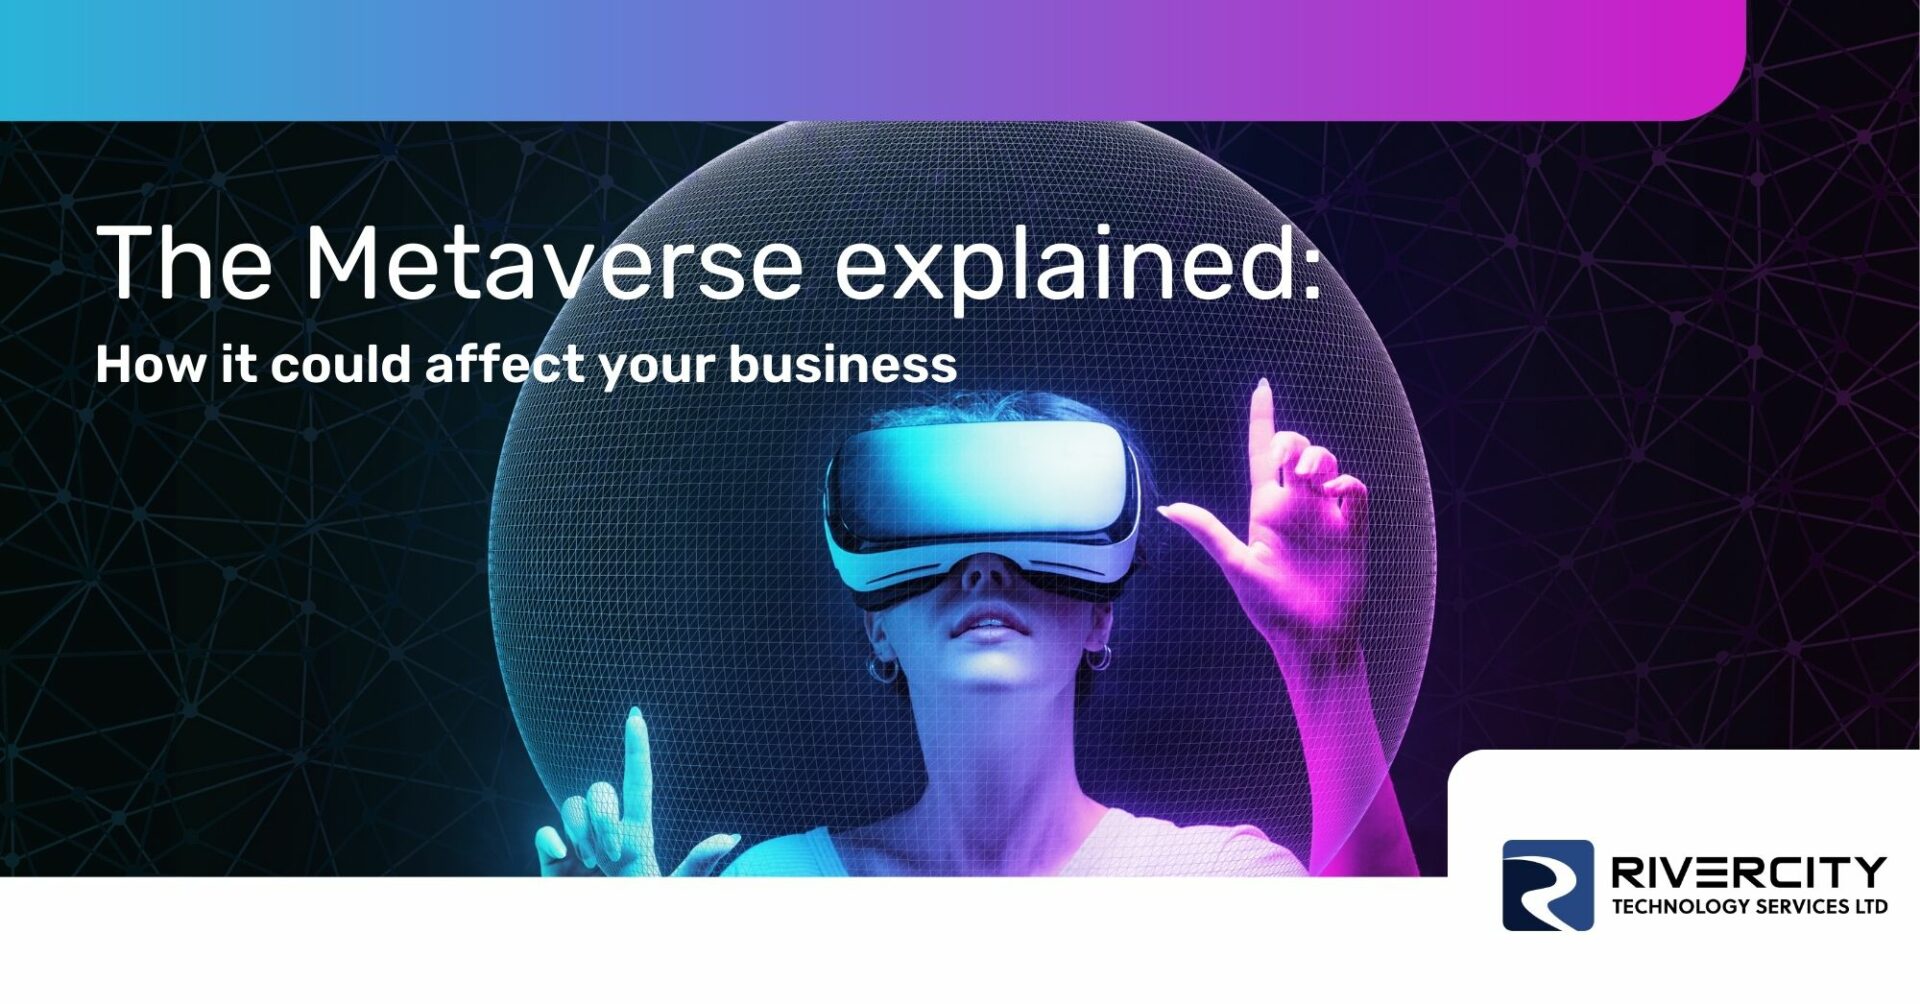 Promotional banner with the text "The Metaverse explained"